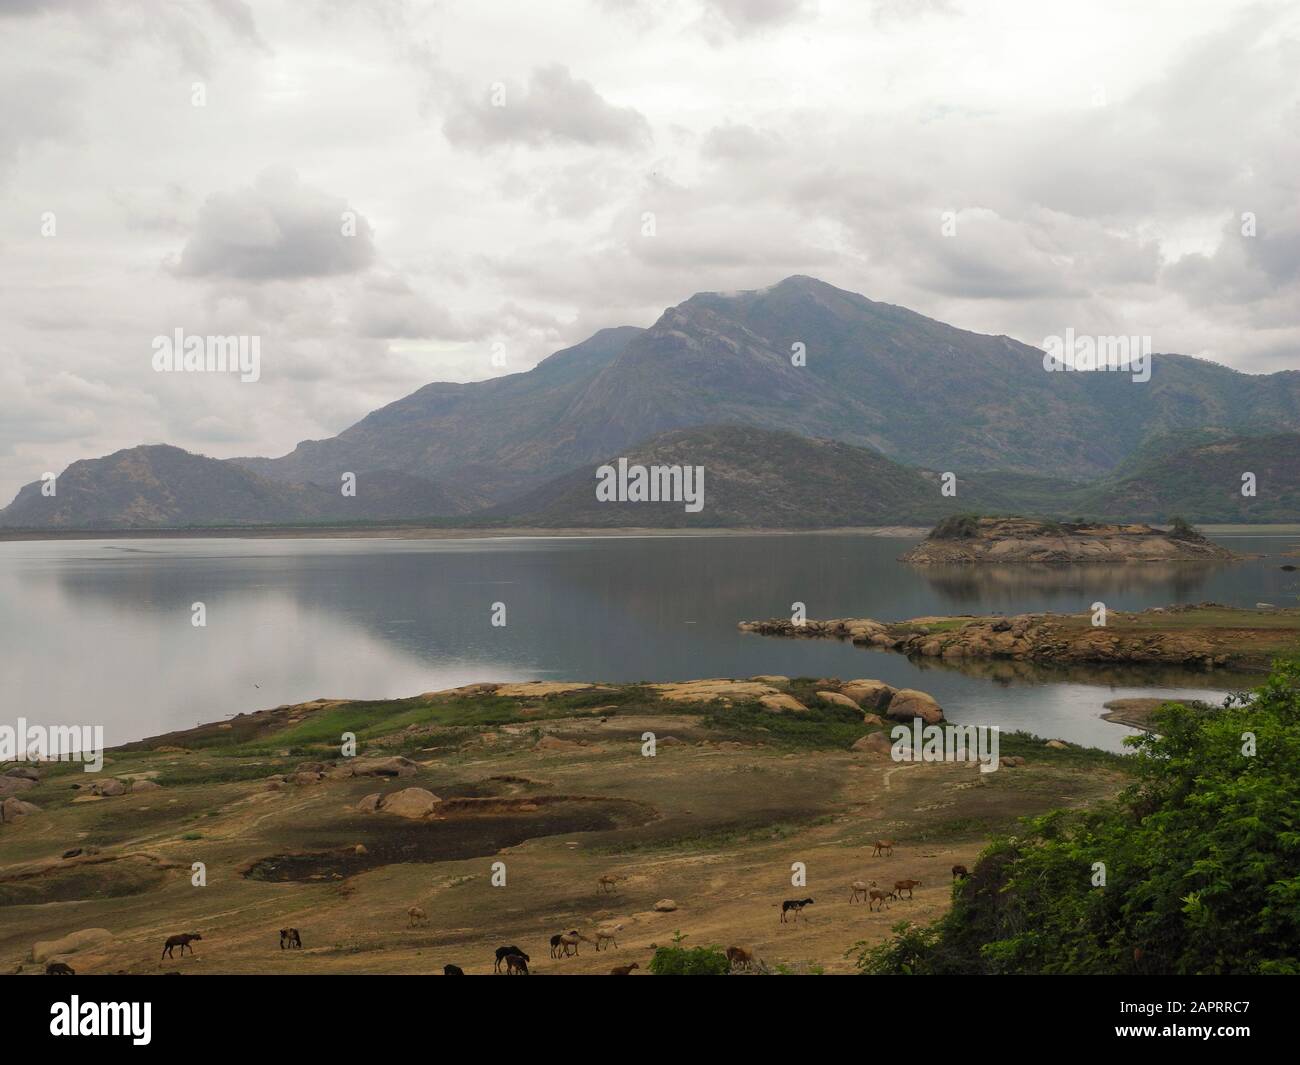 Landscape with lake and animals in the reserve Valparai, India, Tamil Nadu Stock Photo